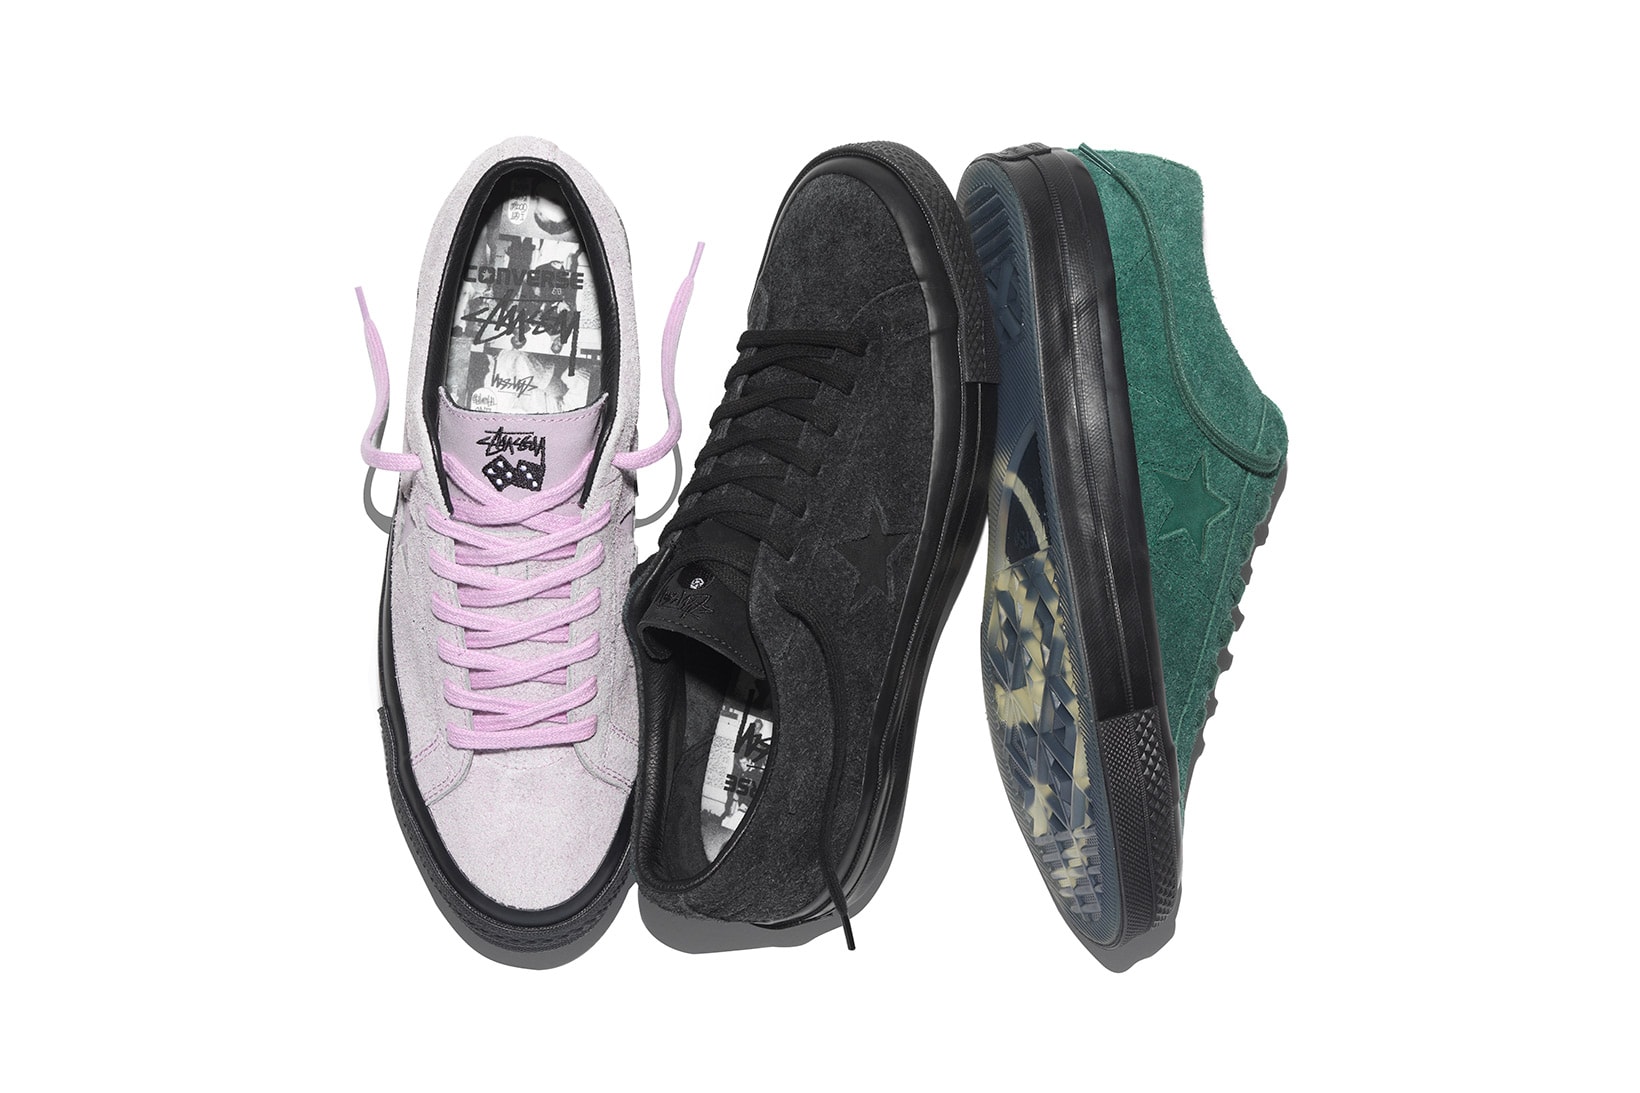 Stussy Converse One Star Silhouette